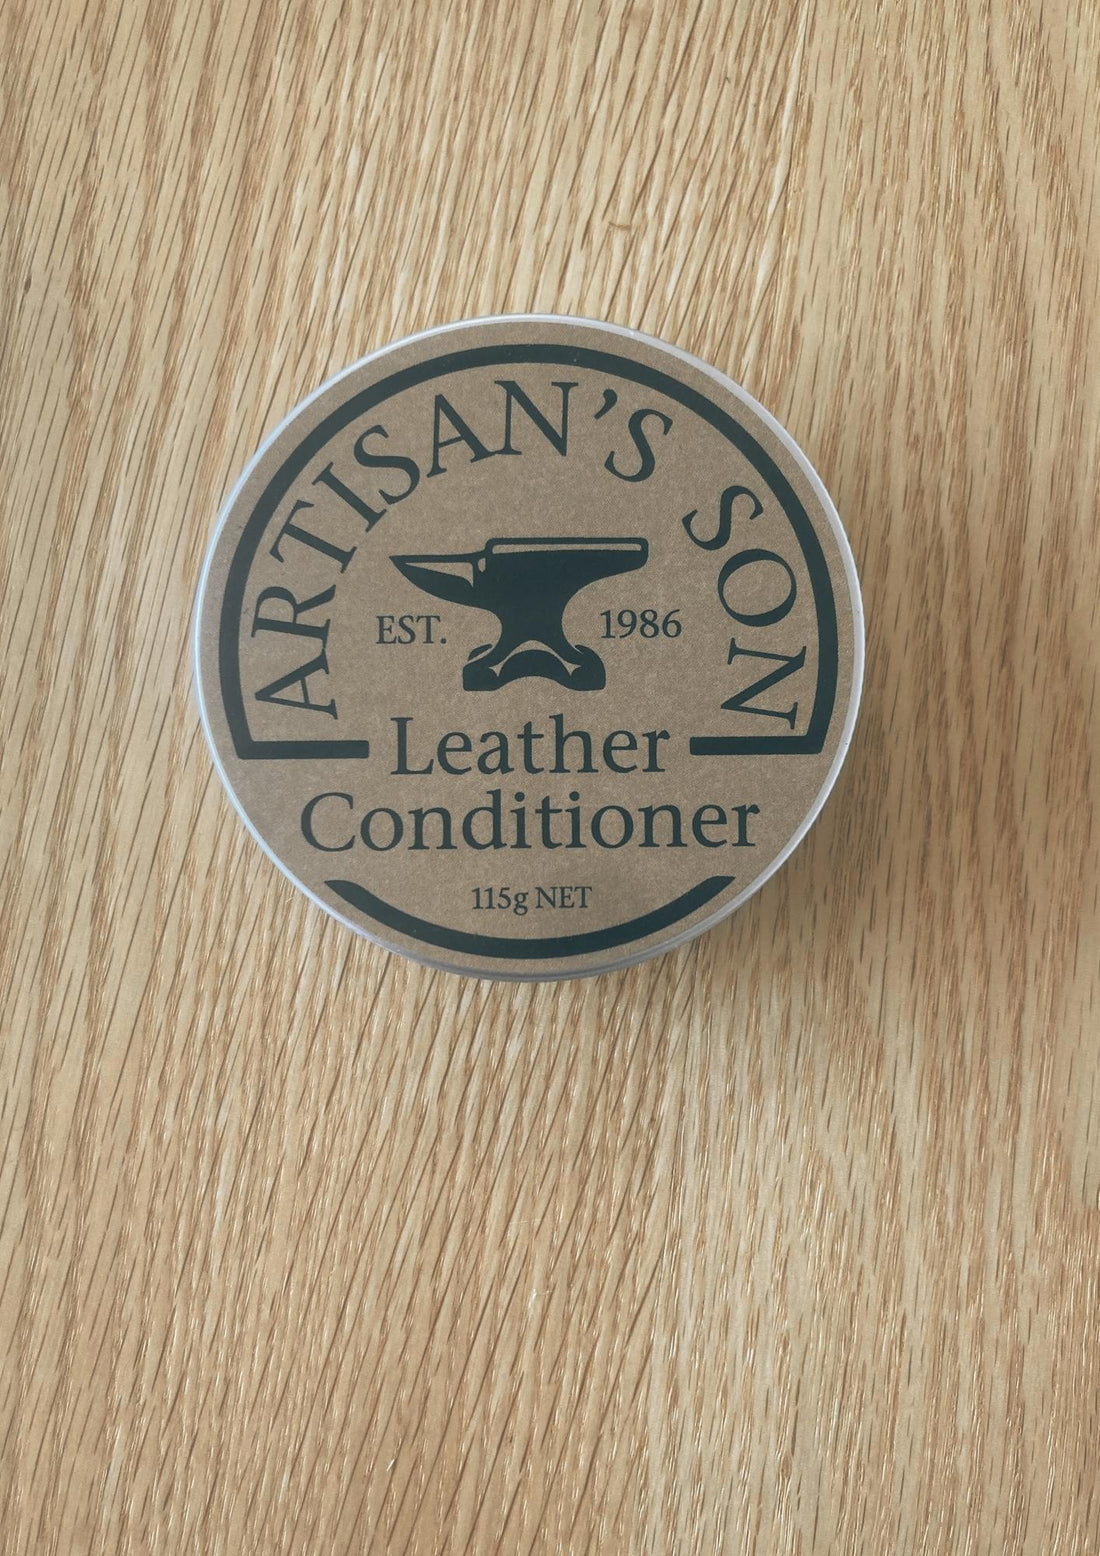 Artisan's Son Premium Wax Blend - Leather Conditioner - Koi Knives